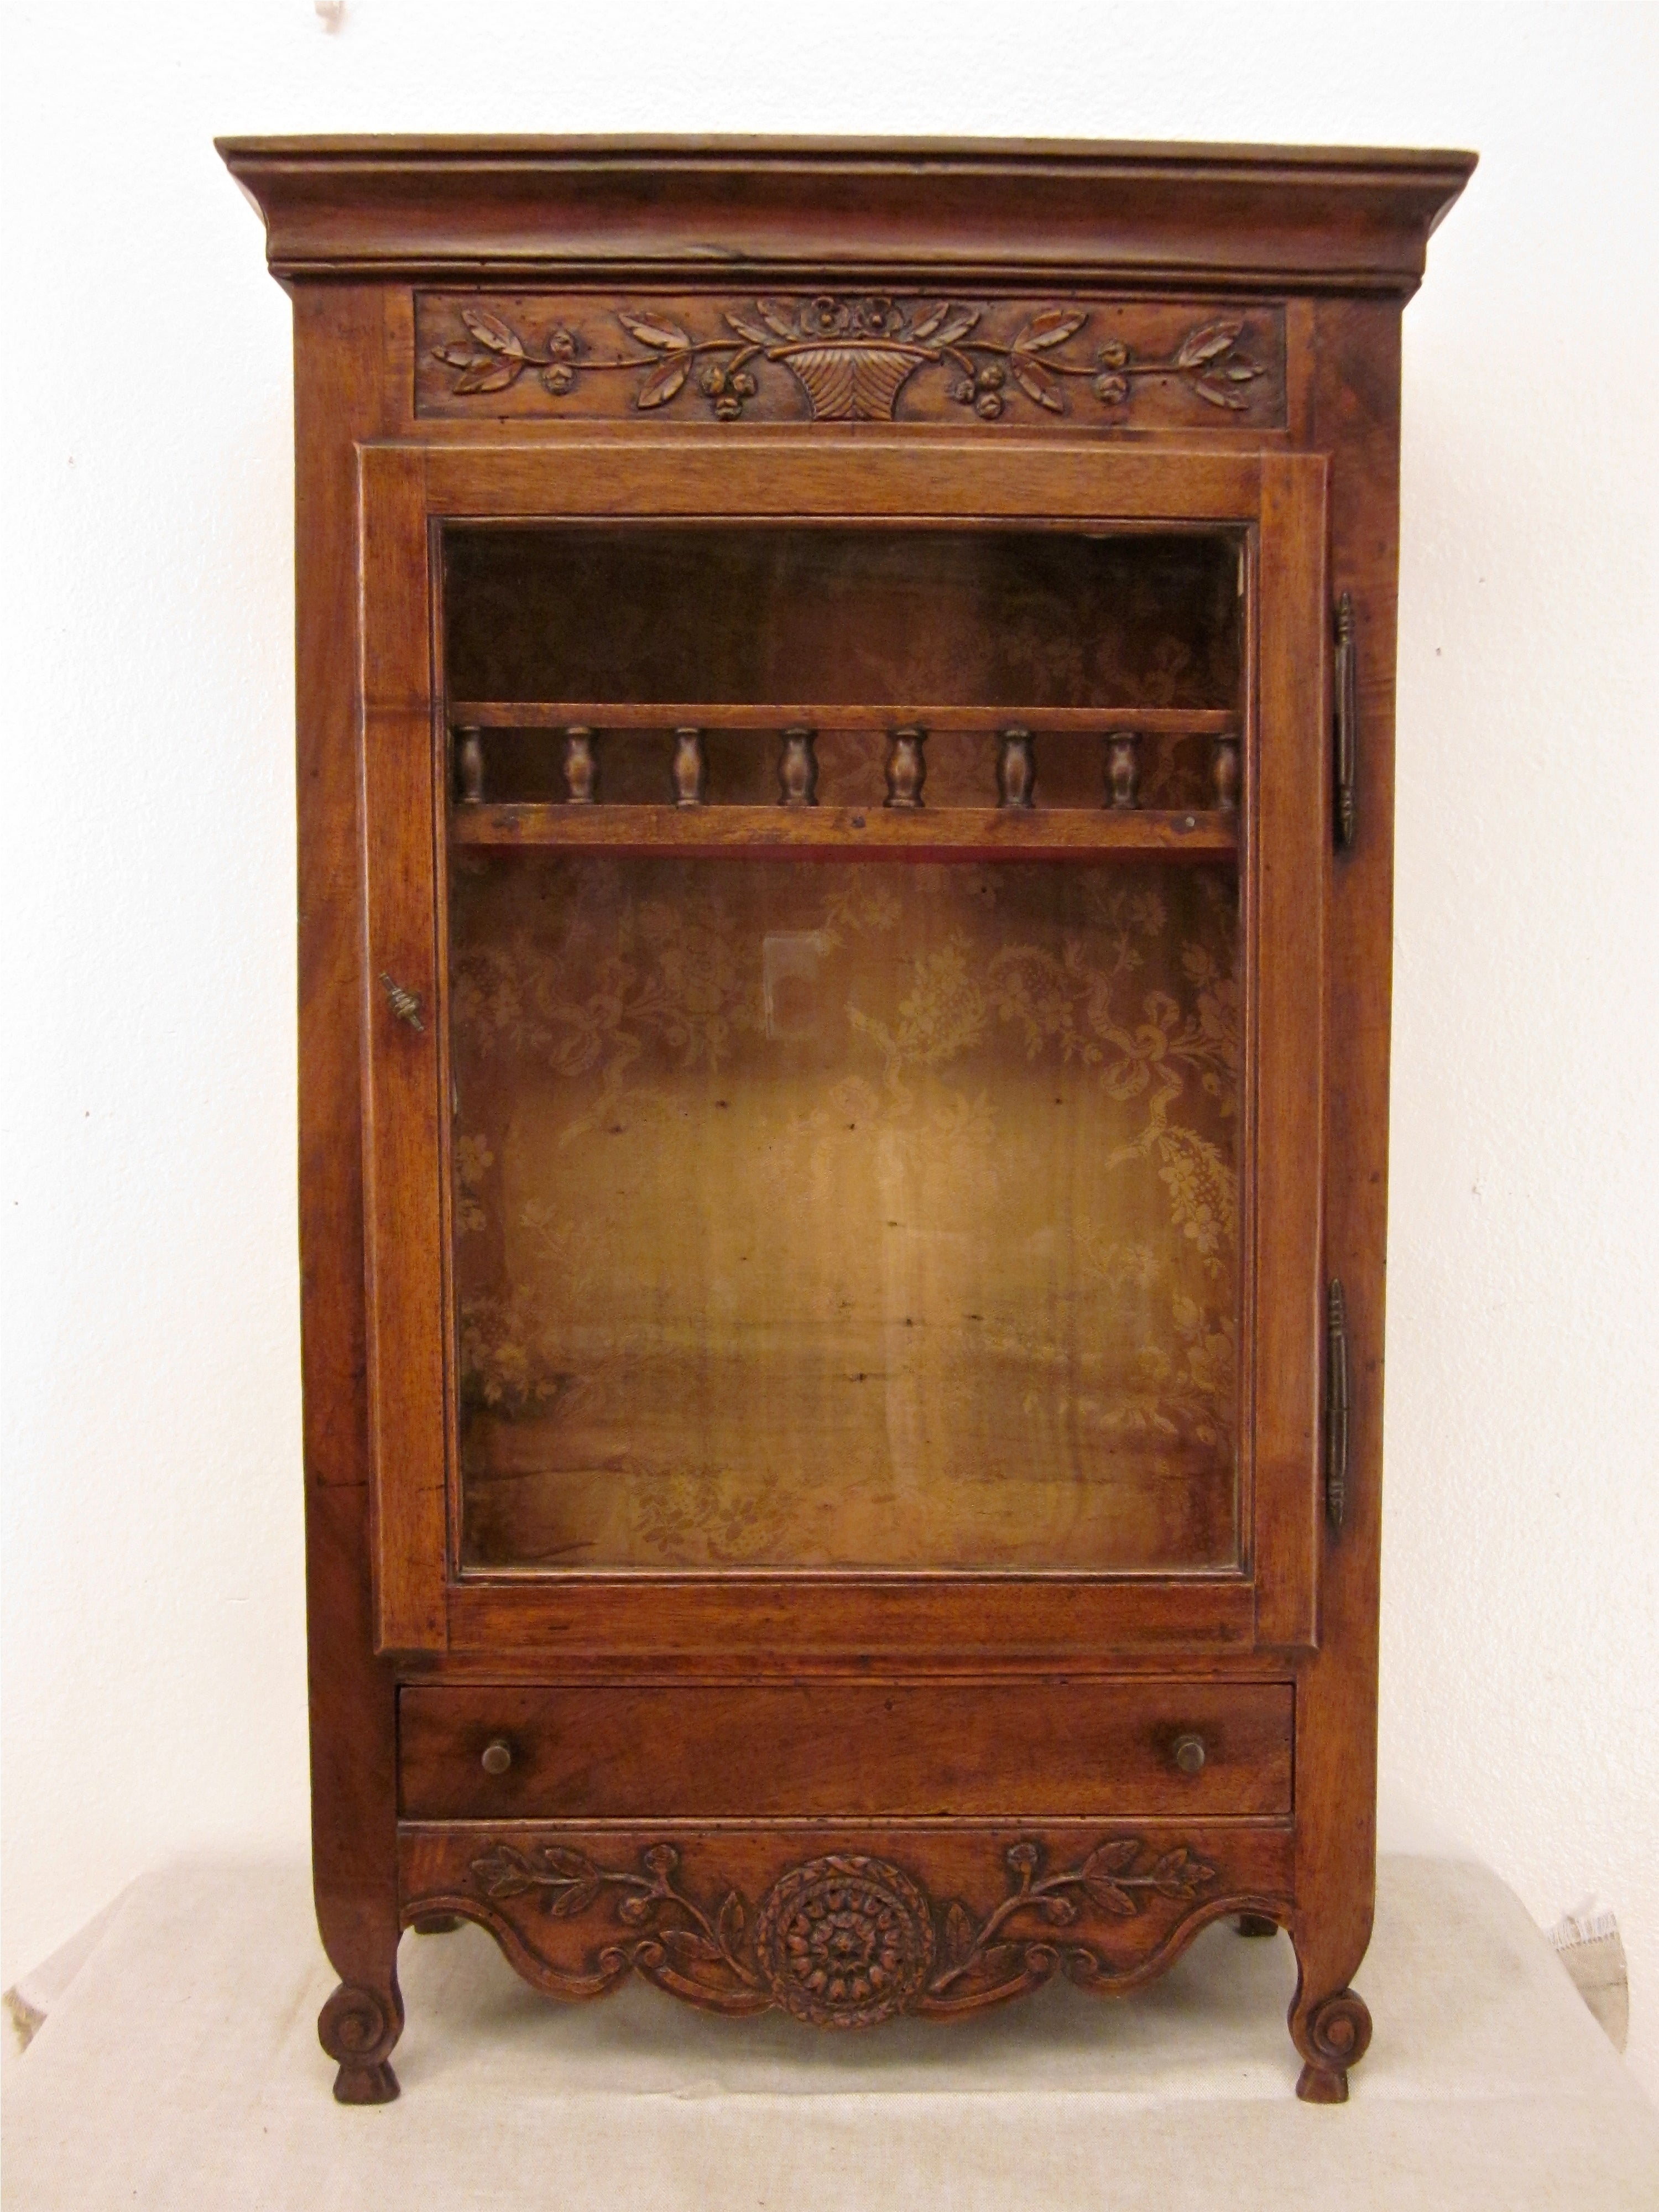 18th Century French Louis XV Verrio or Display Cabinet